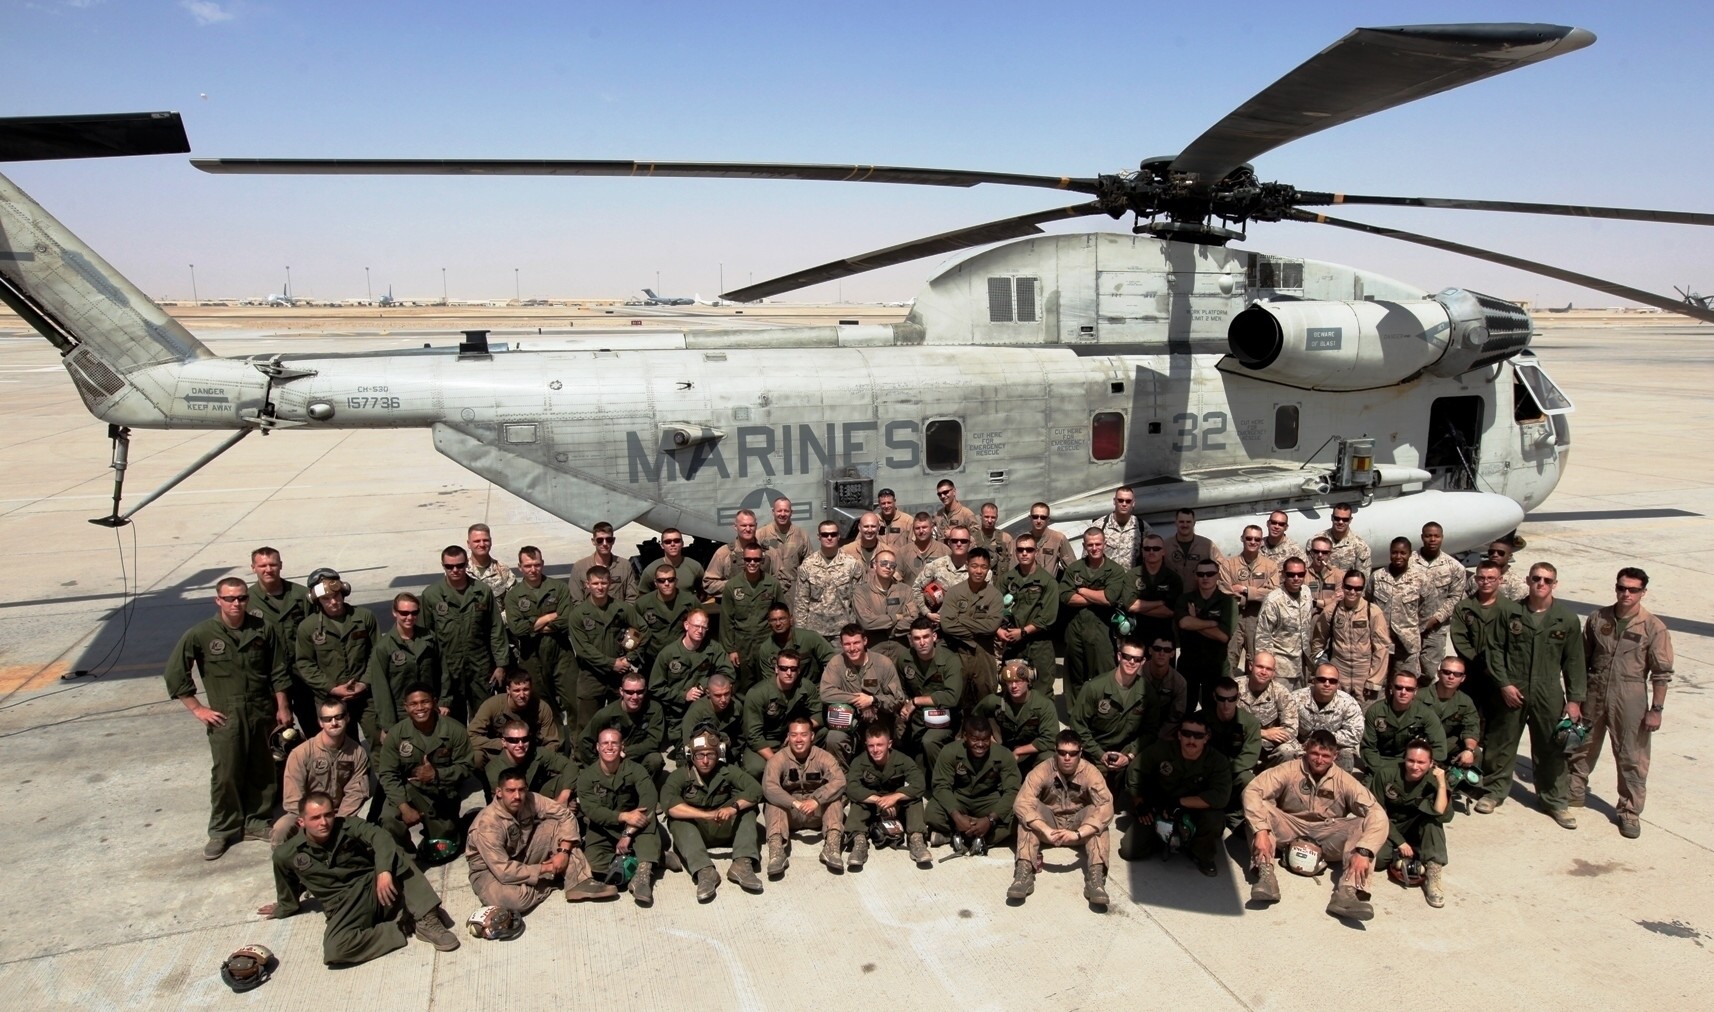 hmh-362 ugly angels marine heavy helicopter squadron usmc sikorsky ch-53d sea stallion 20